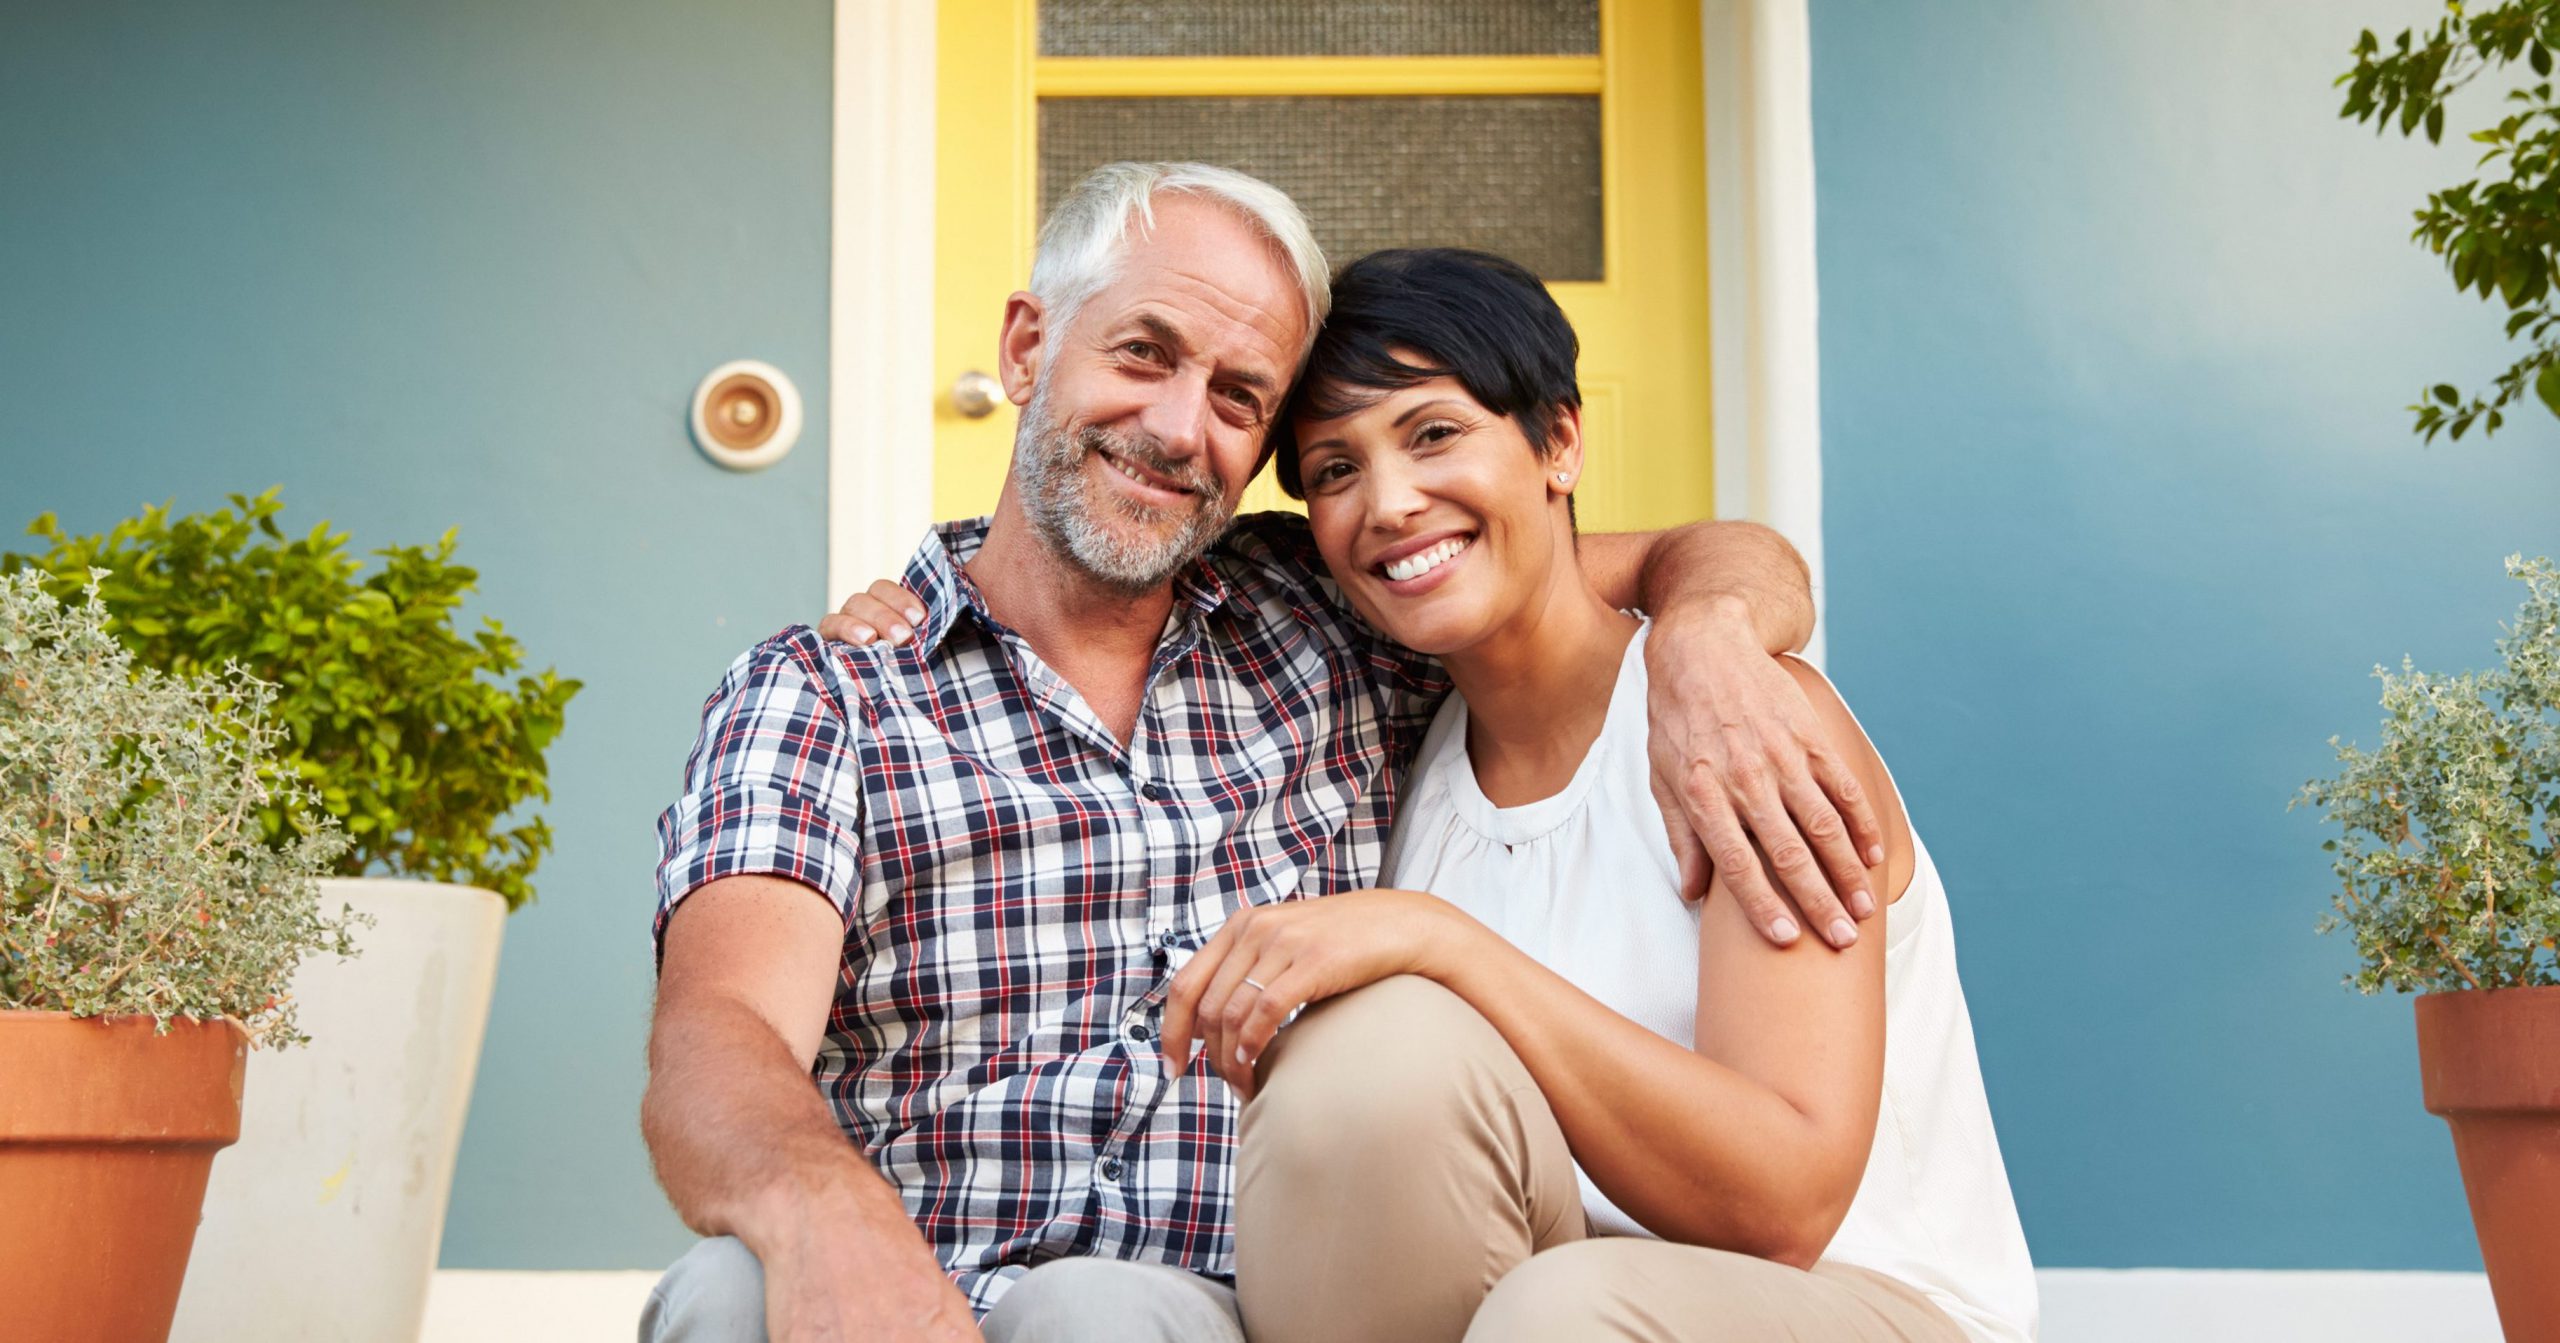 man and woman smiling on their front porch, urology compounding